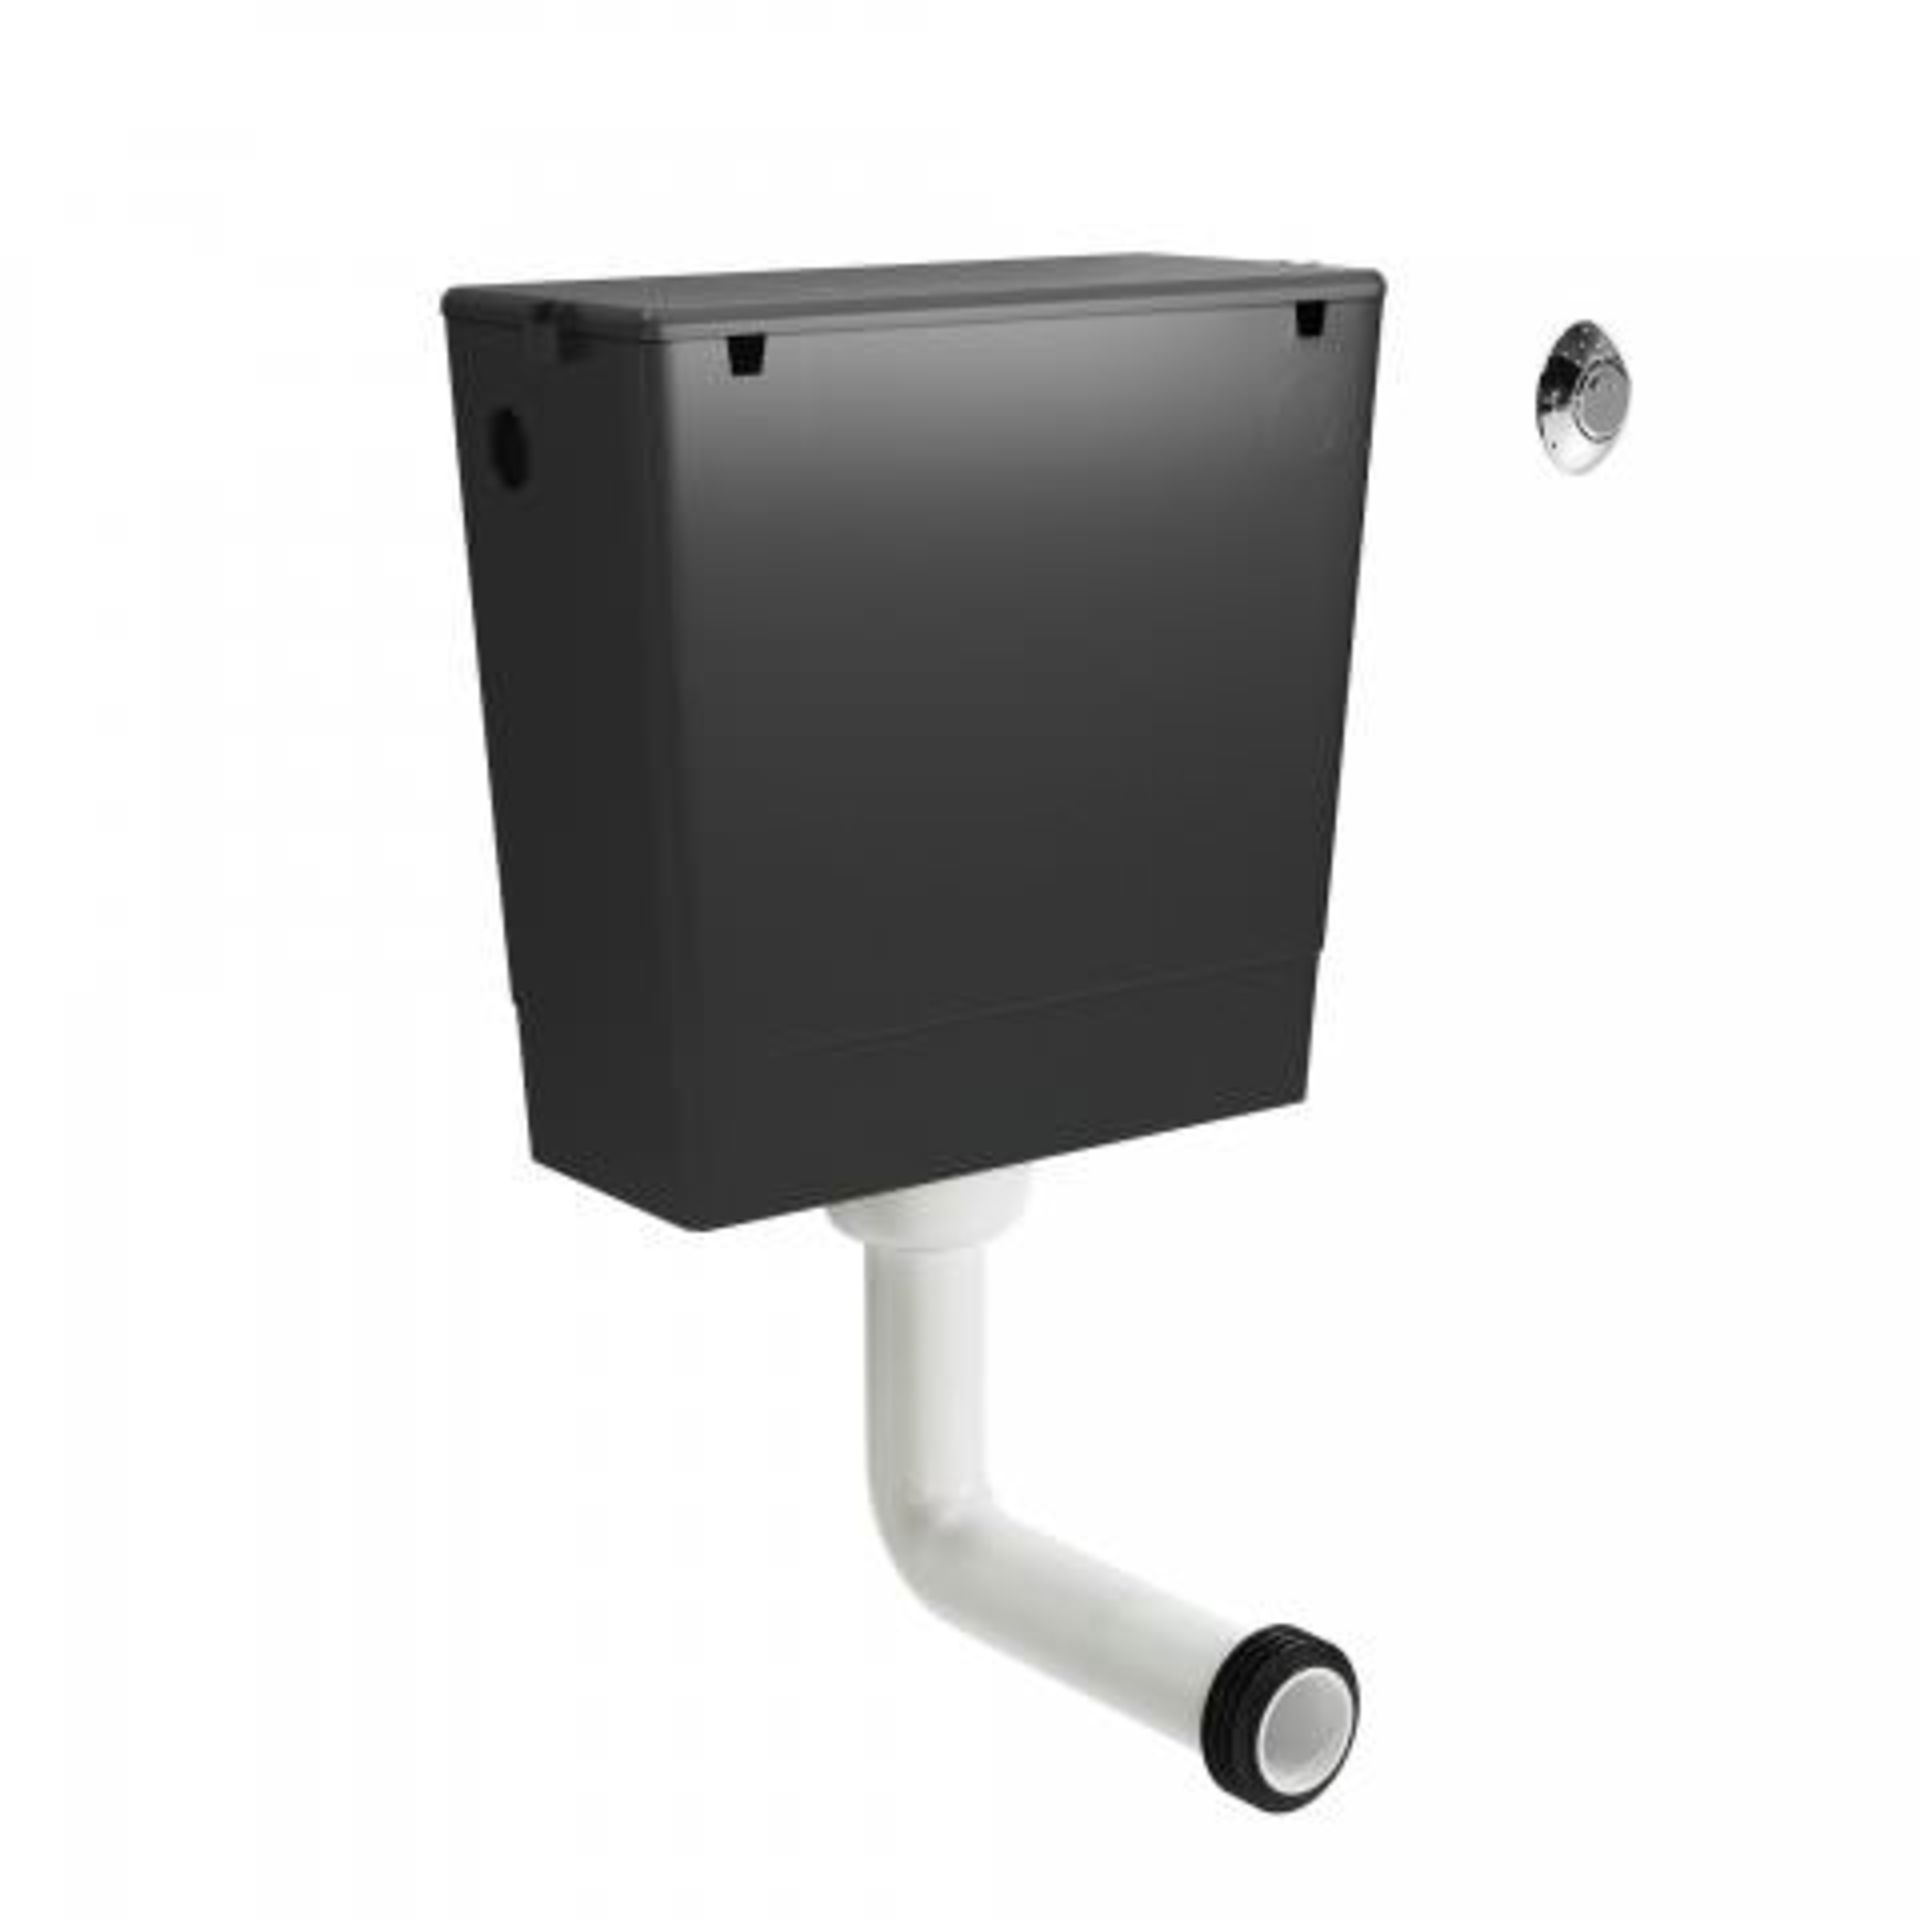 (G175) Wirquin Dual Flush Concealed Cistern. RRP £69.99. This Dual Flush Concealed Cistern is